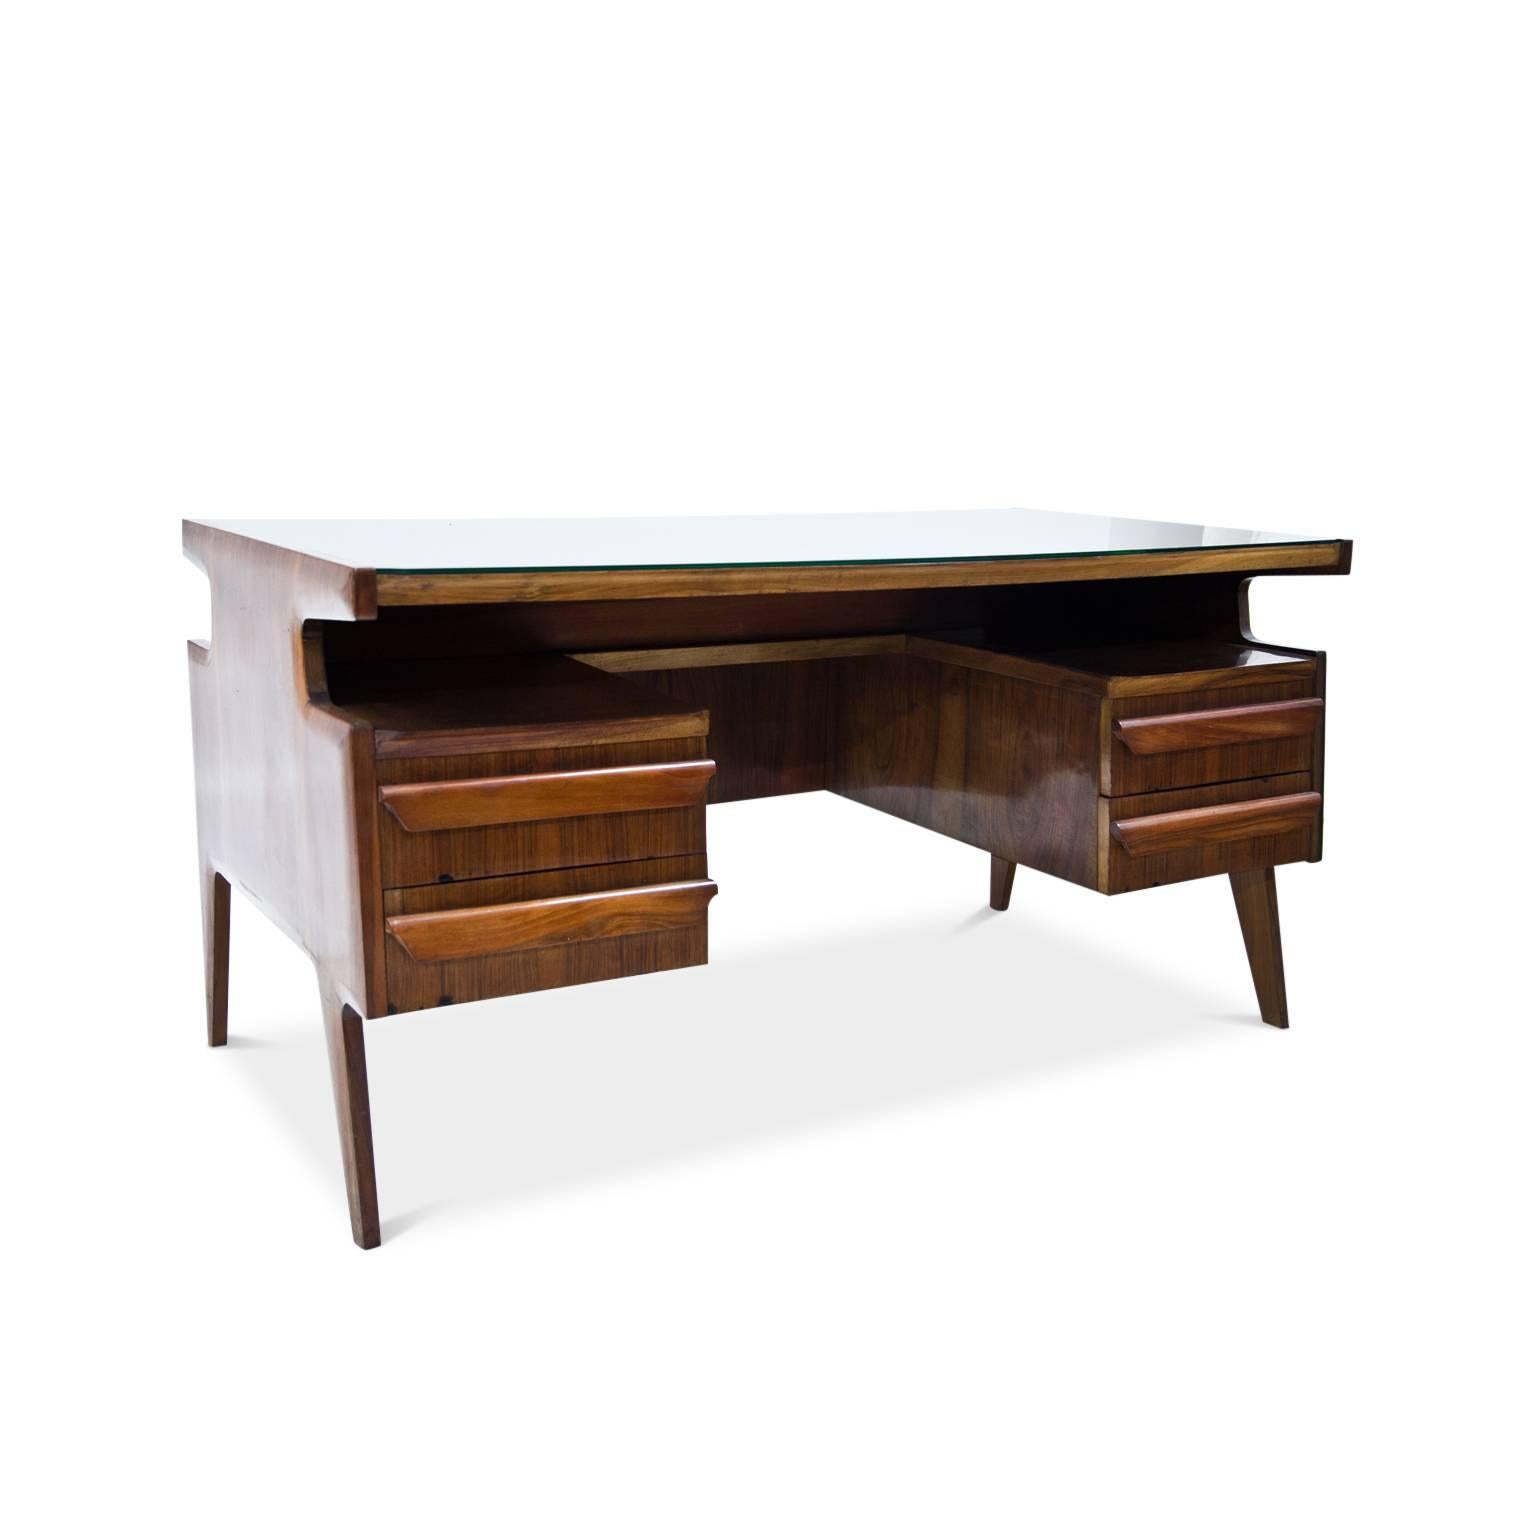 Elegant executive desk on slightly angled legs. The writing surface is covered with a green-tinted glass pane. Underneath is a shelving area and four drawers. The table shows a beautiful veneer pattern and is designed for an all-round view.